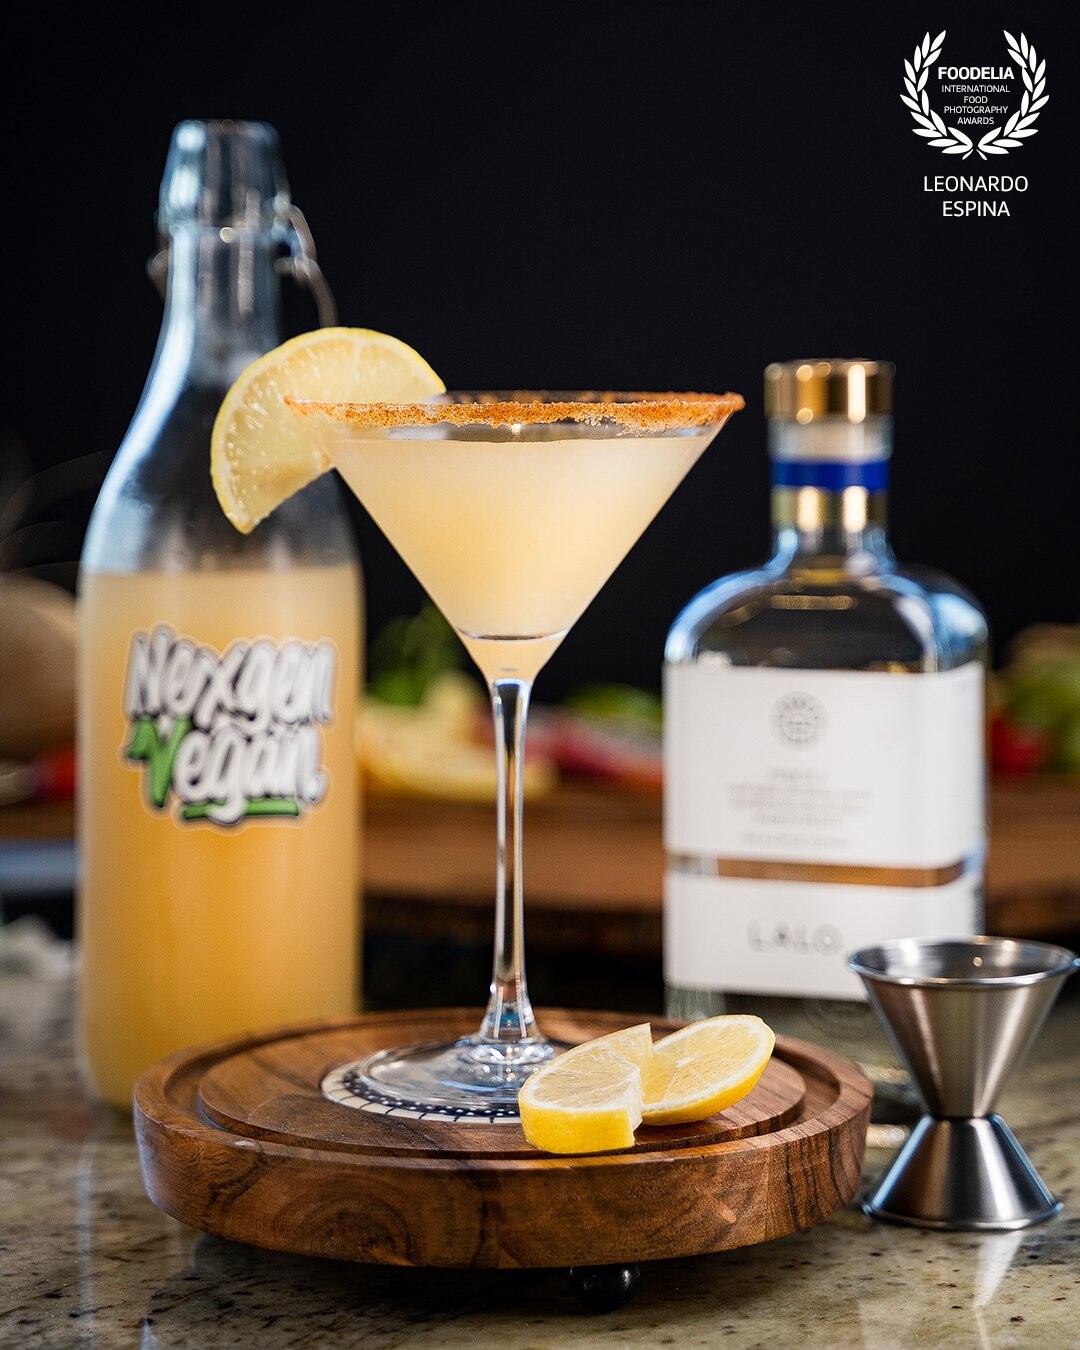 An elegant vegan margarita, using a lighting scheme with two side lights to generate soft contrasts, achieving an enveloping light throughout the photo.